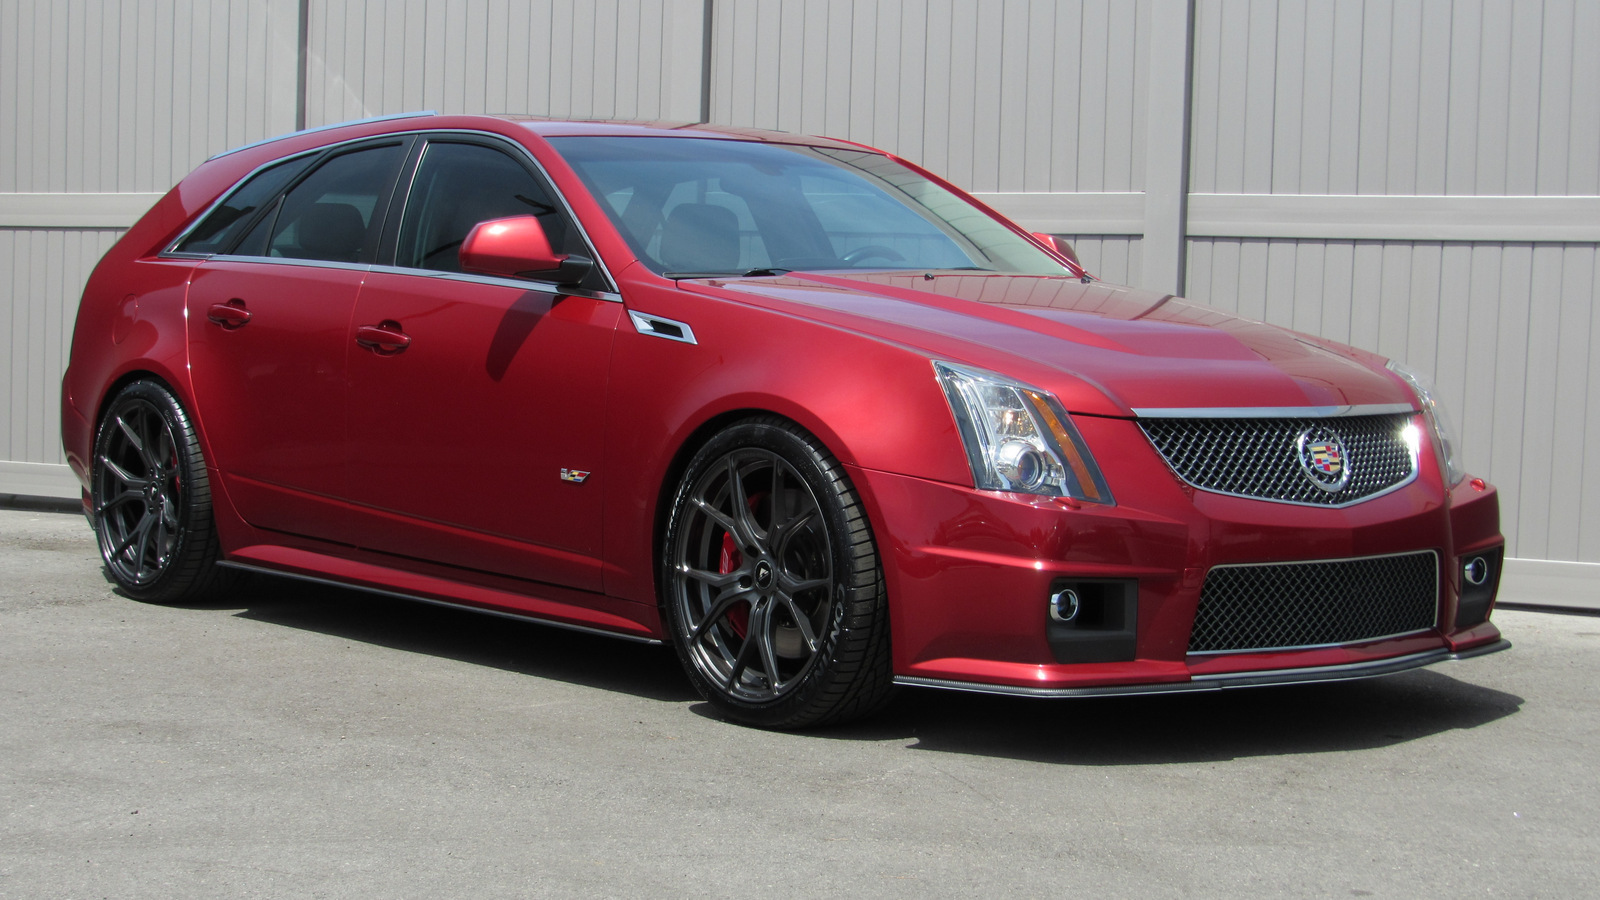 Pre-Owned 2014 Cadillac CTS-V 5dr Wgn Station Wagon in Boise #18M242J ...